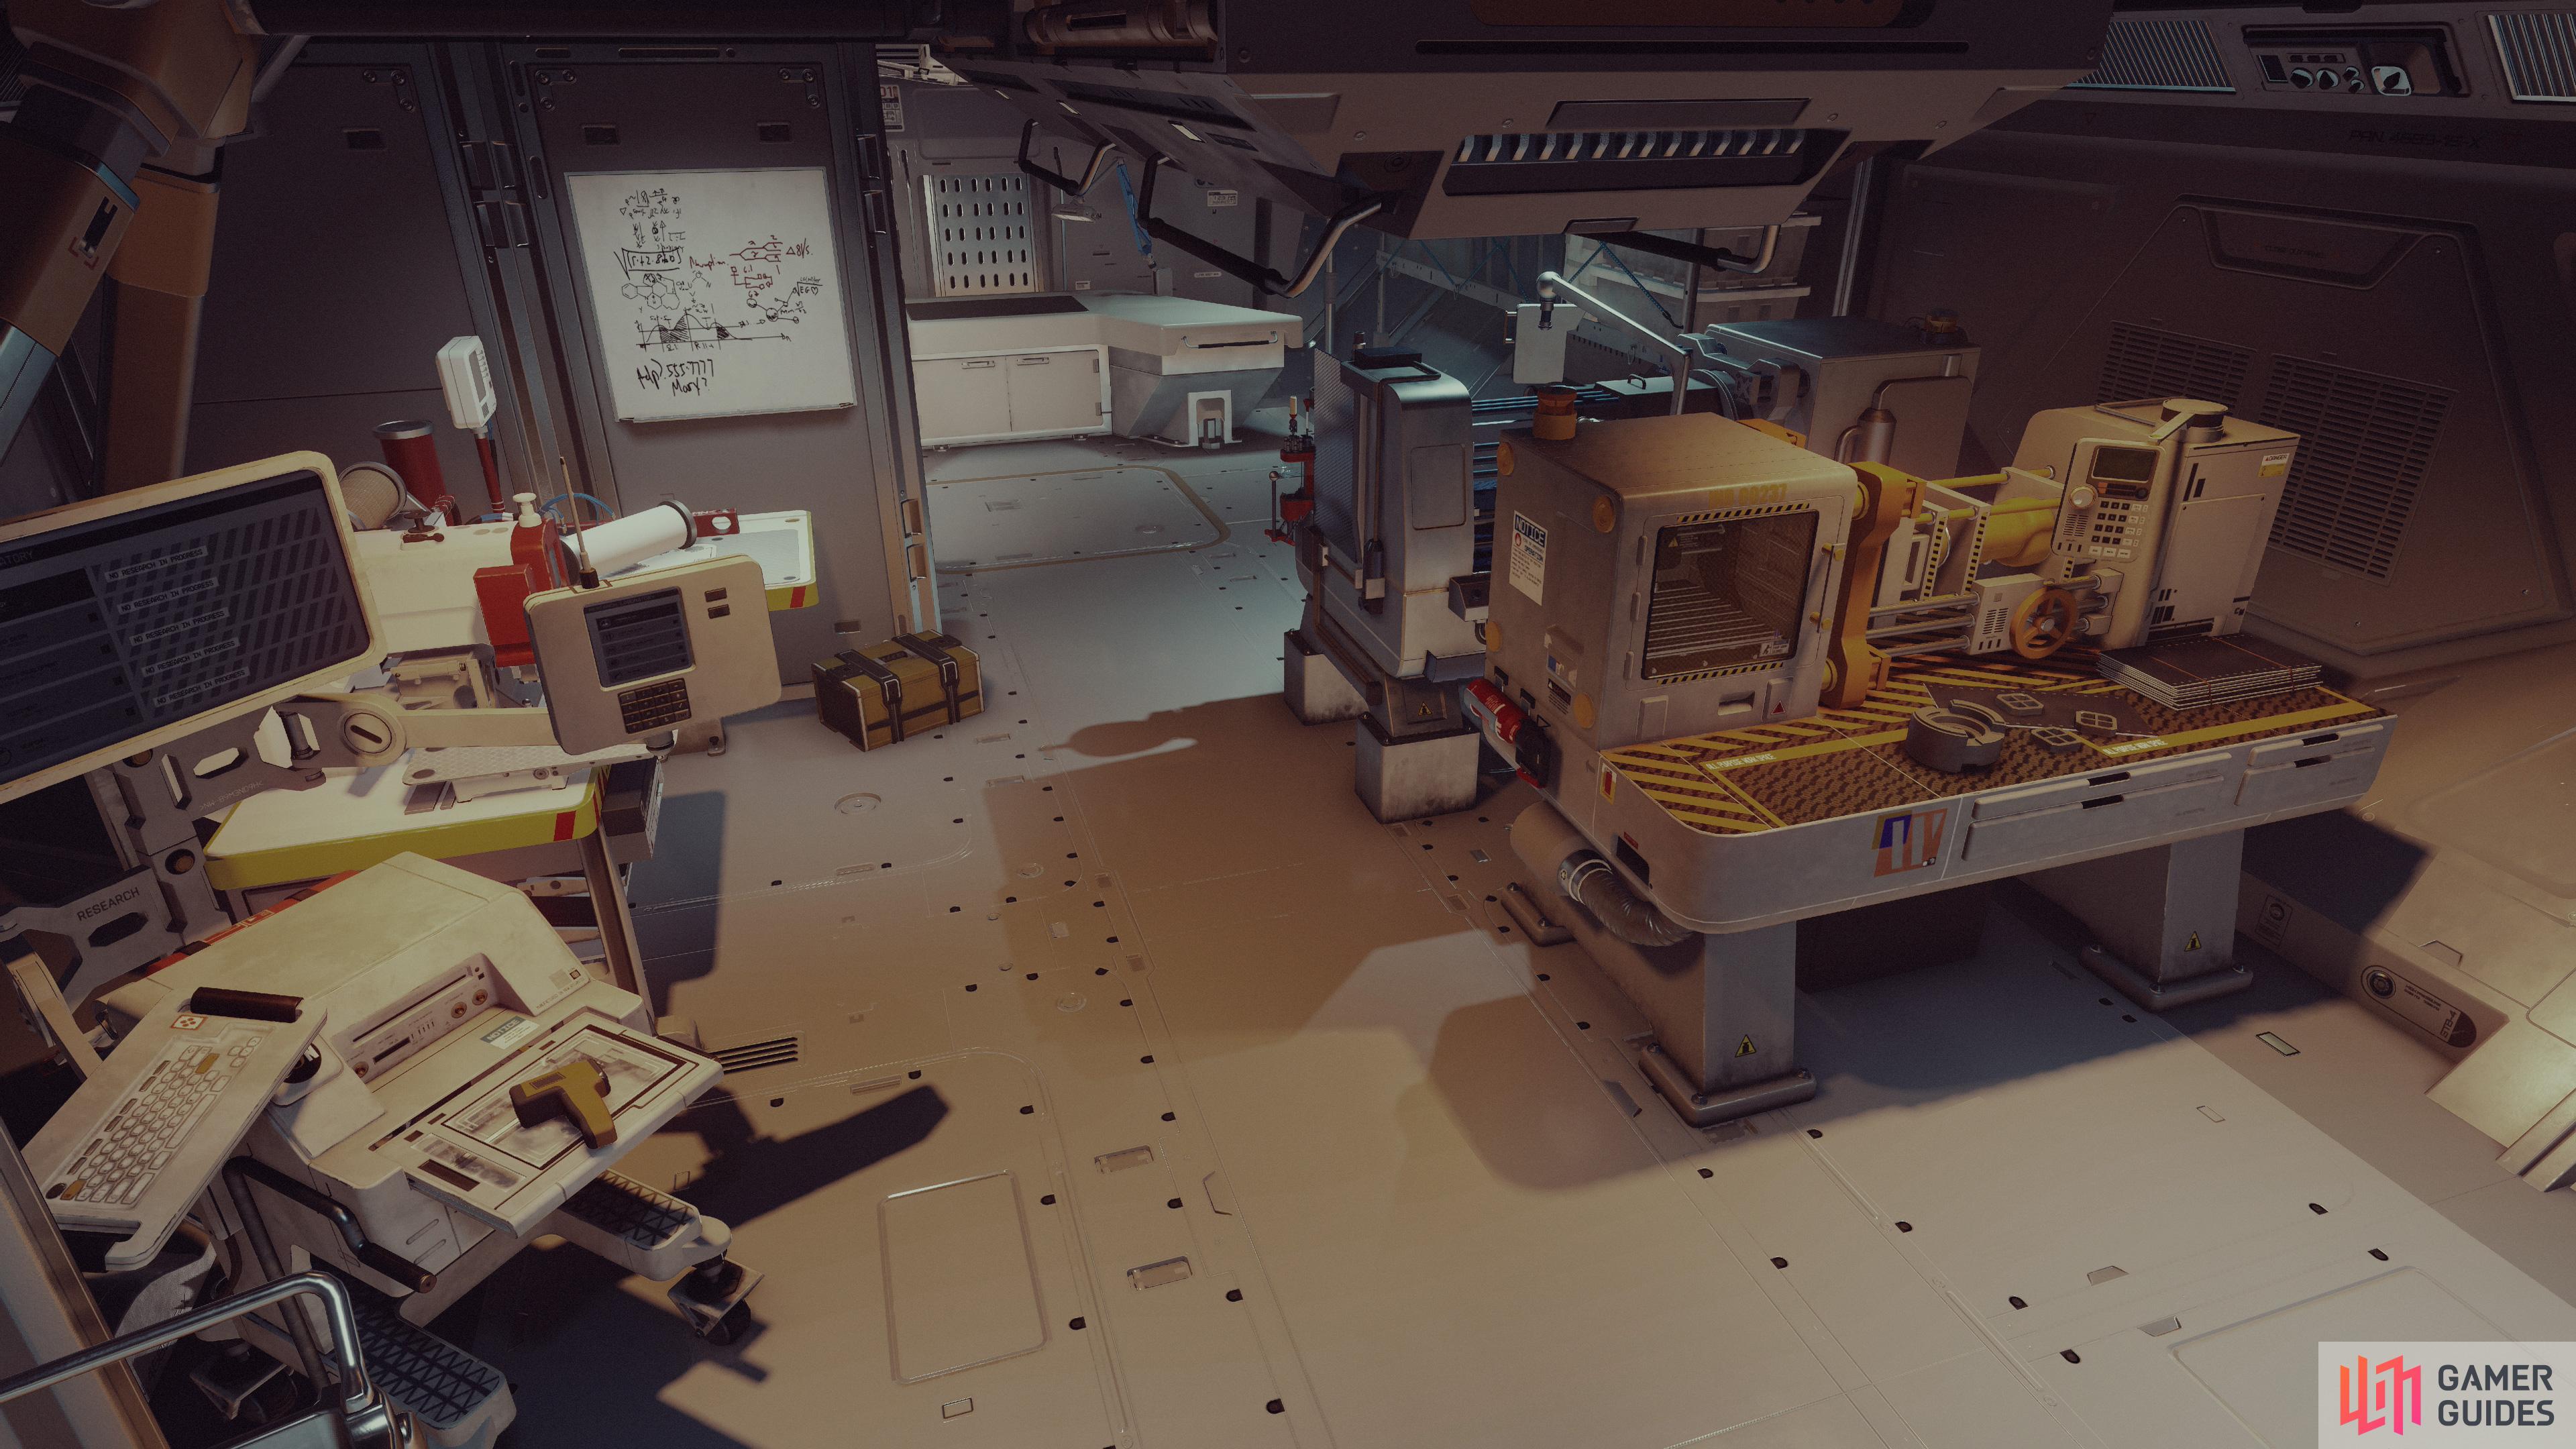 Boasting three crafting stations not offered by any other hab (weapon workbench, spacesuit workbench and industrial workbench) and with a research lab thrown in for good measure, the Workshop is a must-have in all ships.